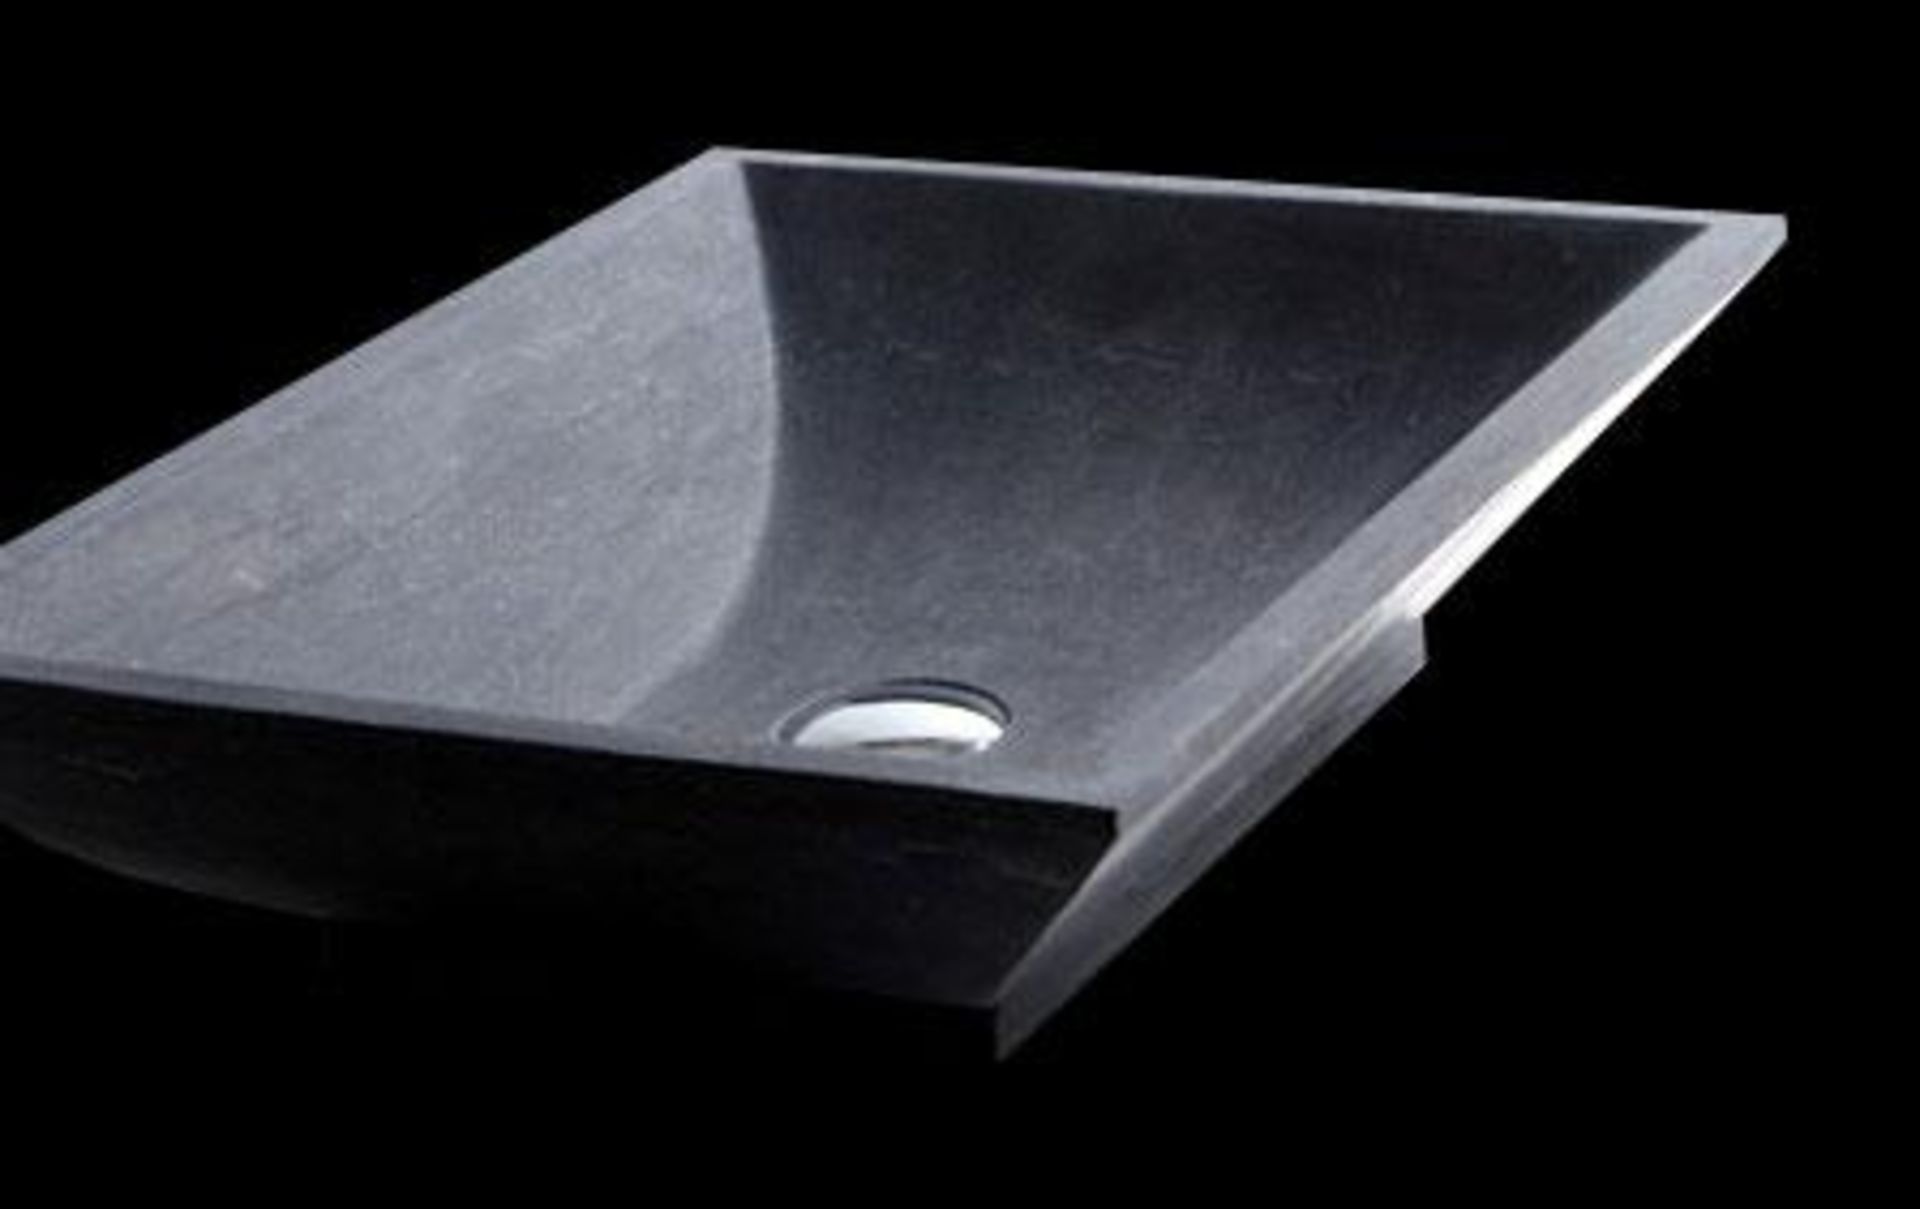 NS12004 500mm x 360mm x 120mm black hand carved natural stone sink – stunning new and boxed RRP £